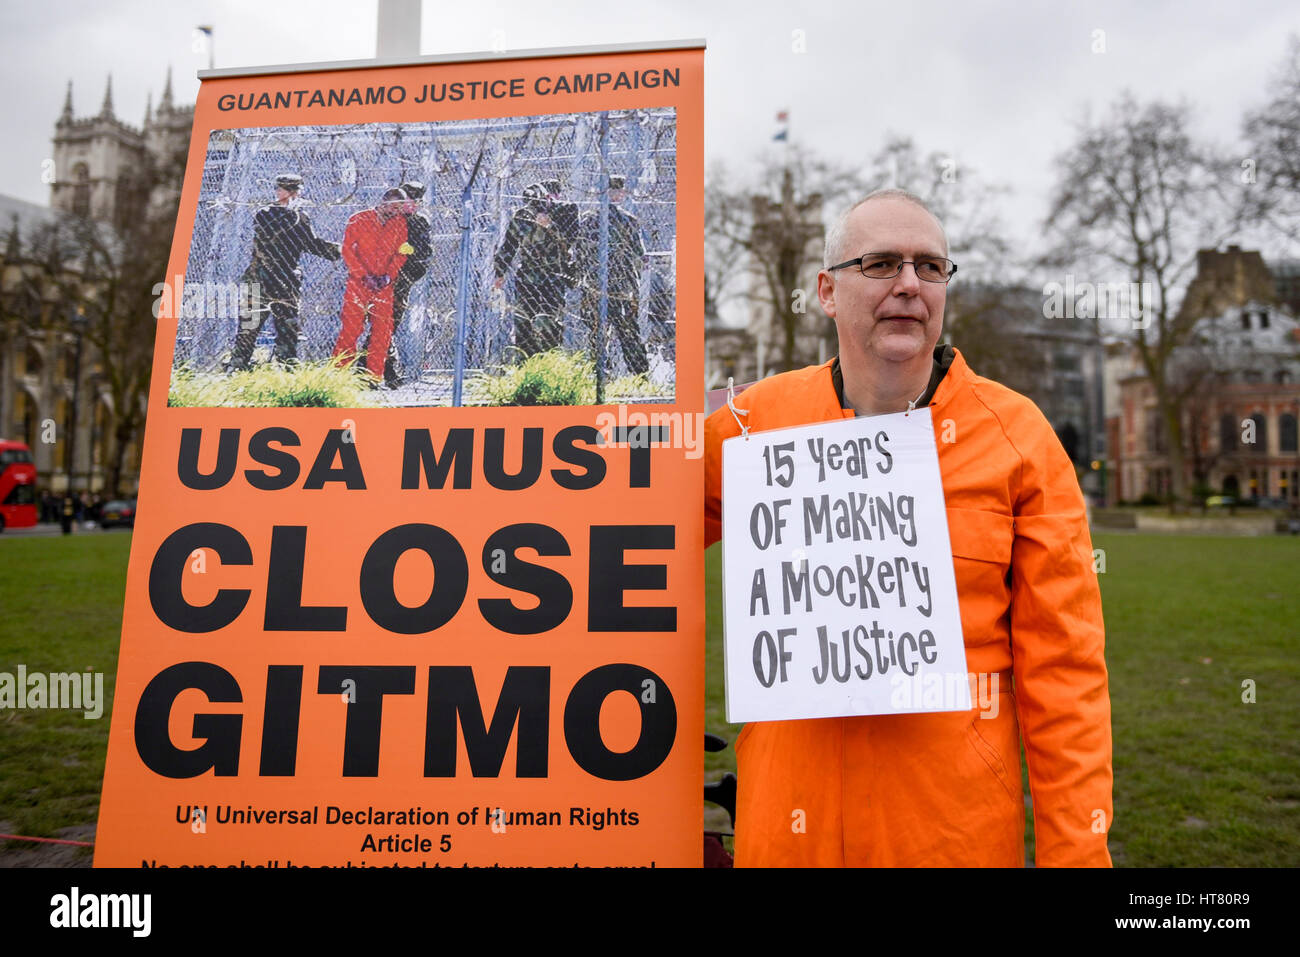 London, UK.  8 March 2017.  Members of Guantanamo Justice Campaign stage a protest in Parliament Square opposite the Houses of Parliament demanding that Donald Trump, President of the United States, close Guantanamo Bay concentration camp and calling on Theresa May, Prime Minister, to seek representations from President Trump that it will be a closure, not a relocation to a mainland US prison.  Credit: Stephen Chung / Alamy Live News Stock Photo